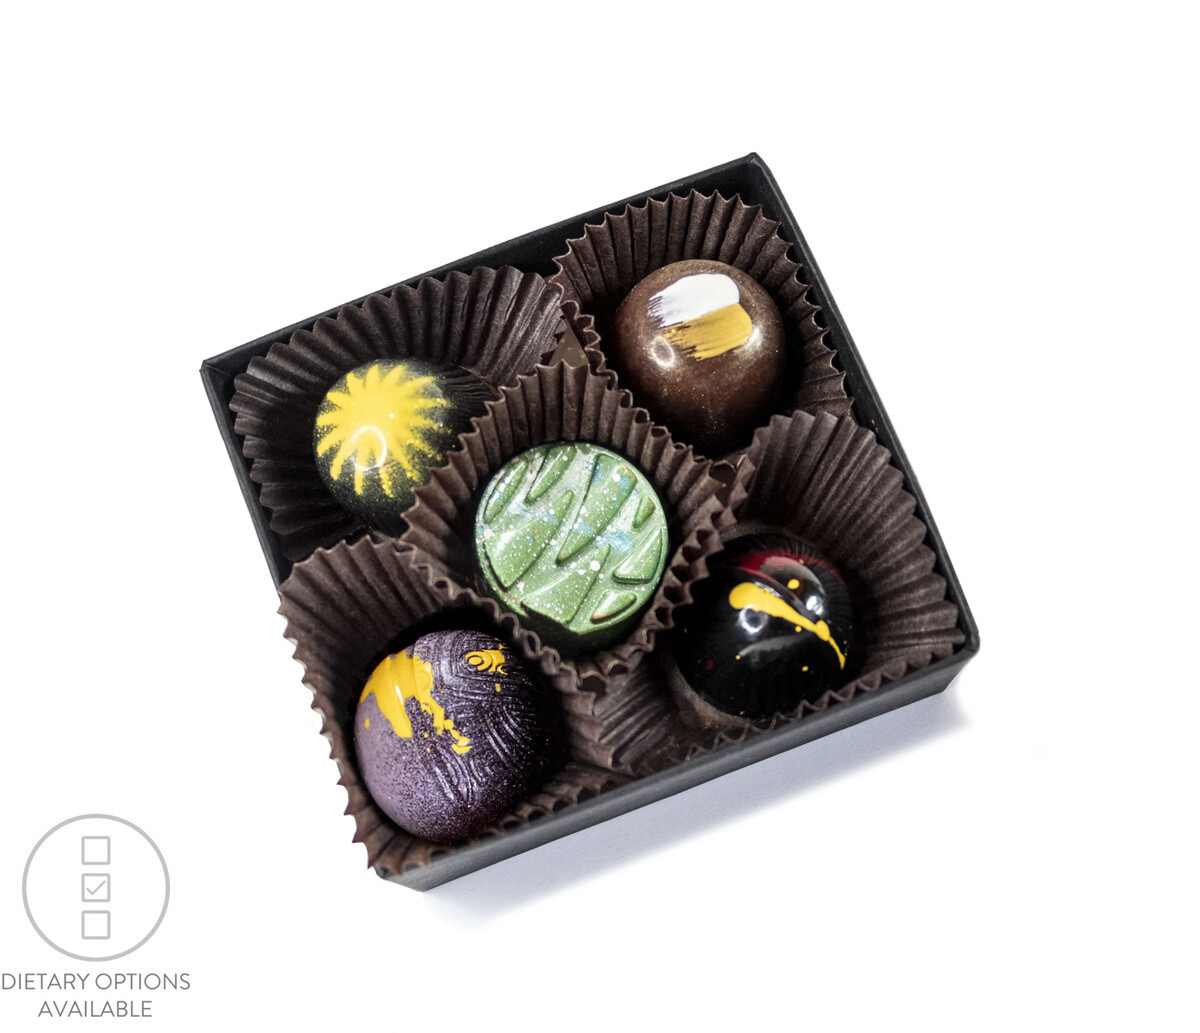 5-Piece Box of Assorted Confections